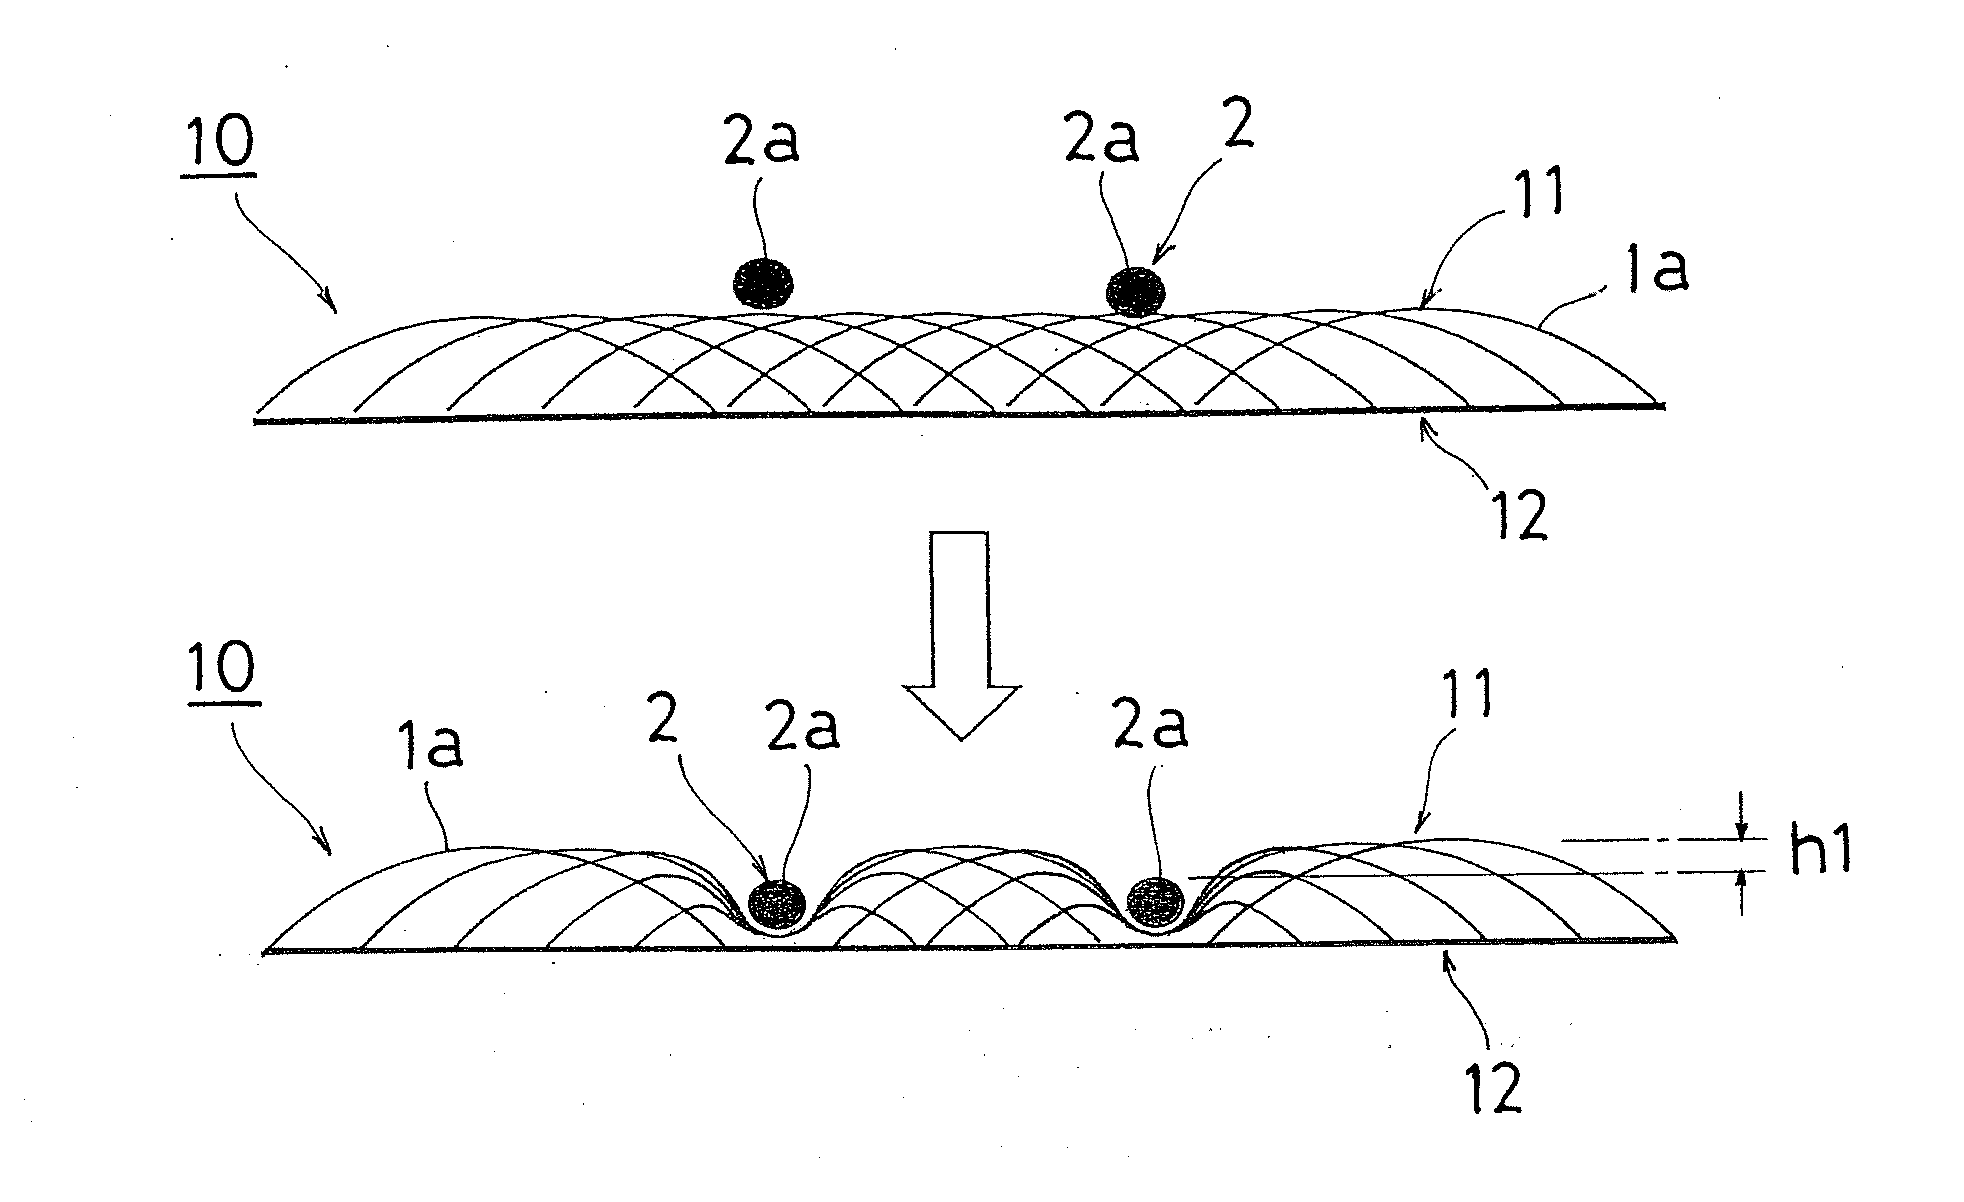 Warp knitted fabric and method of manufacturing same